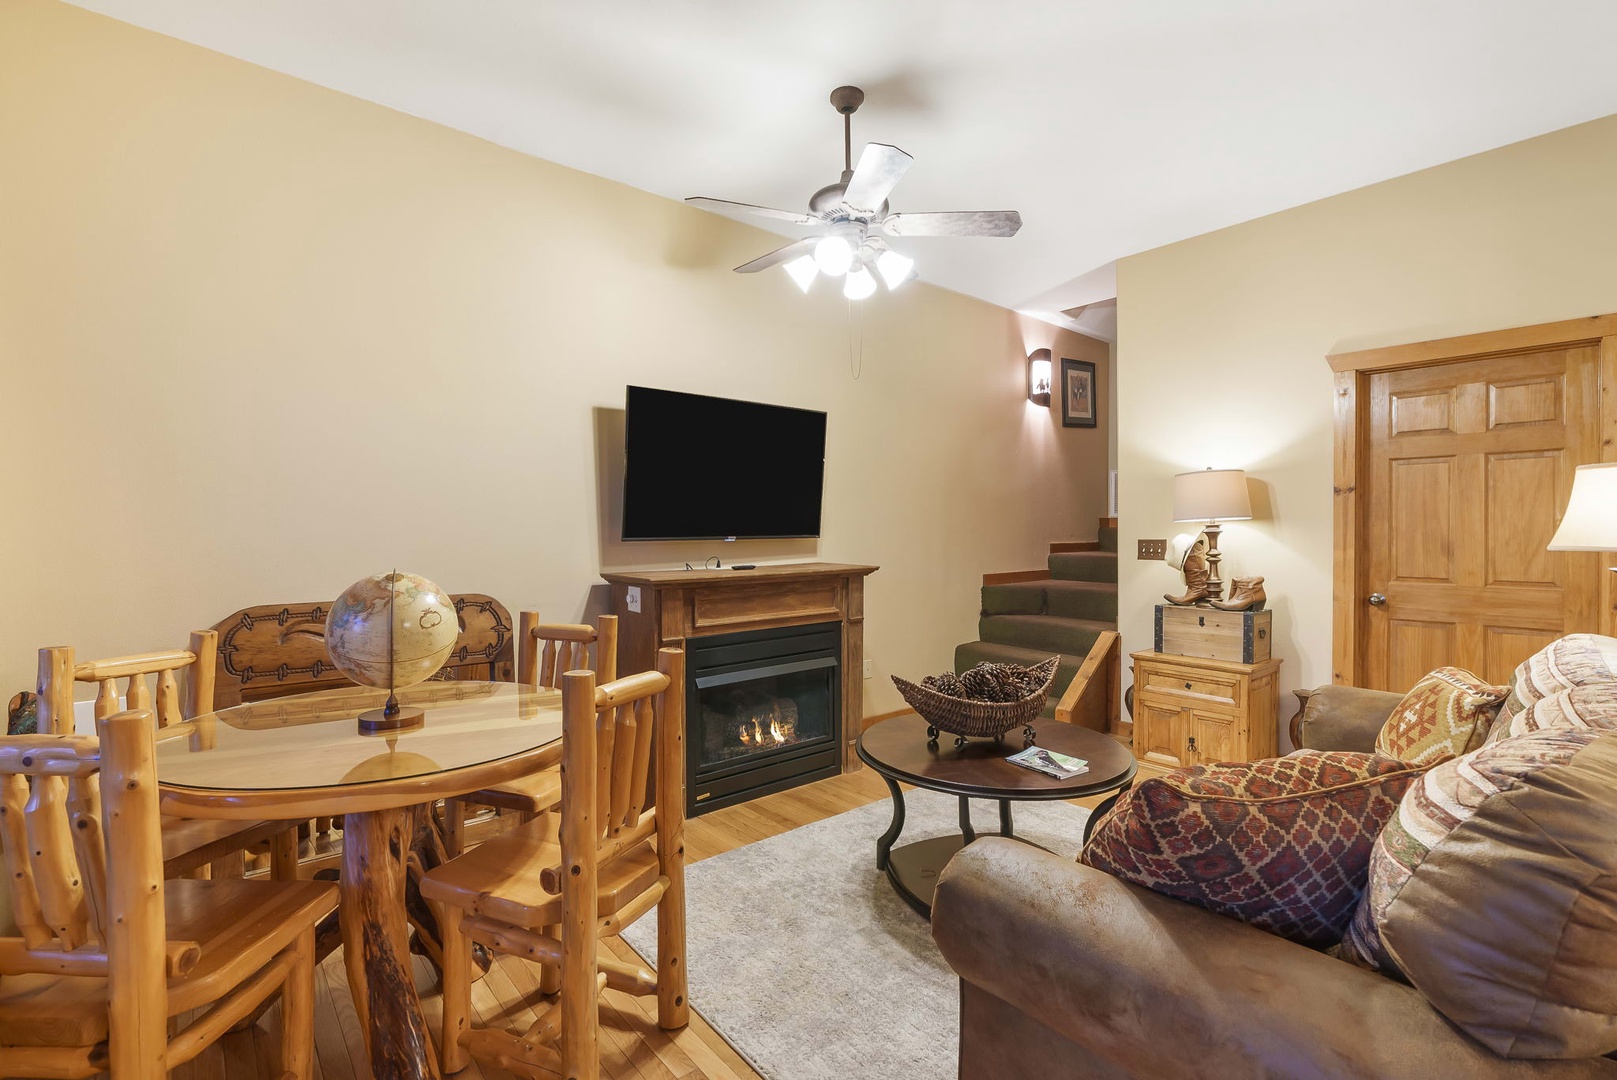 Lower floor living area with Smart TV, fireplace, 2 Twin beds, bathroom, and back deck access